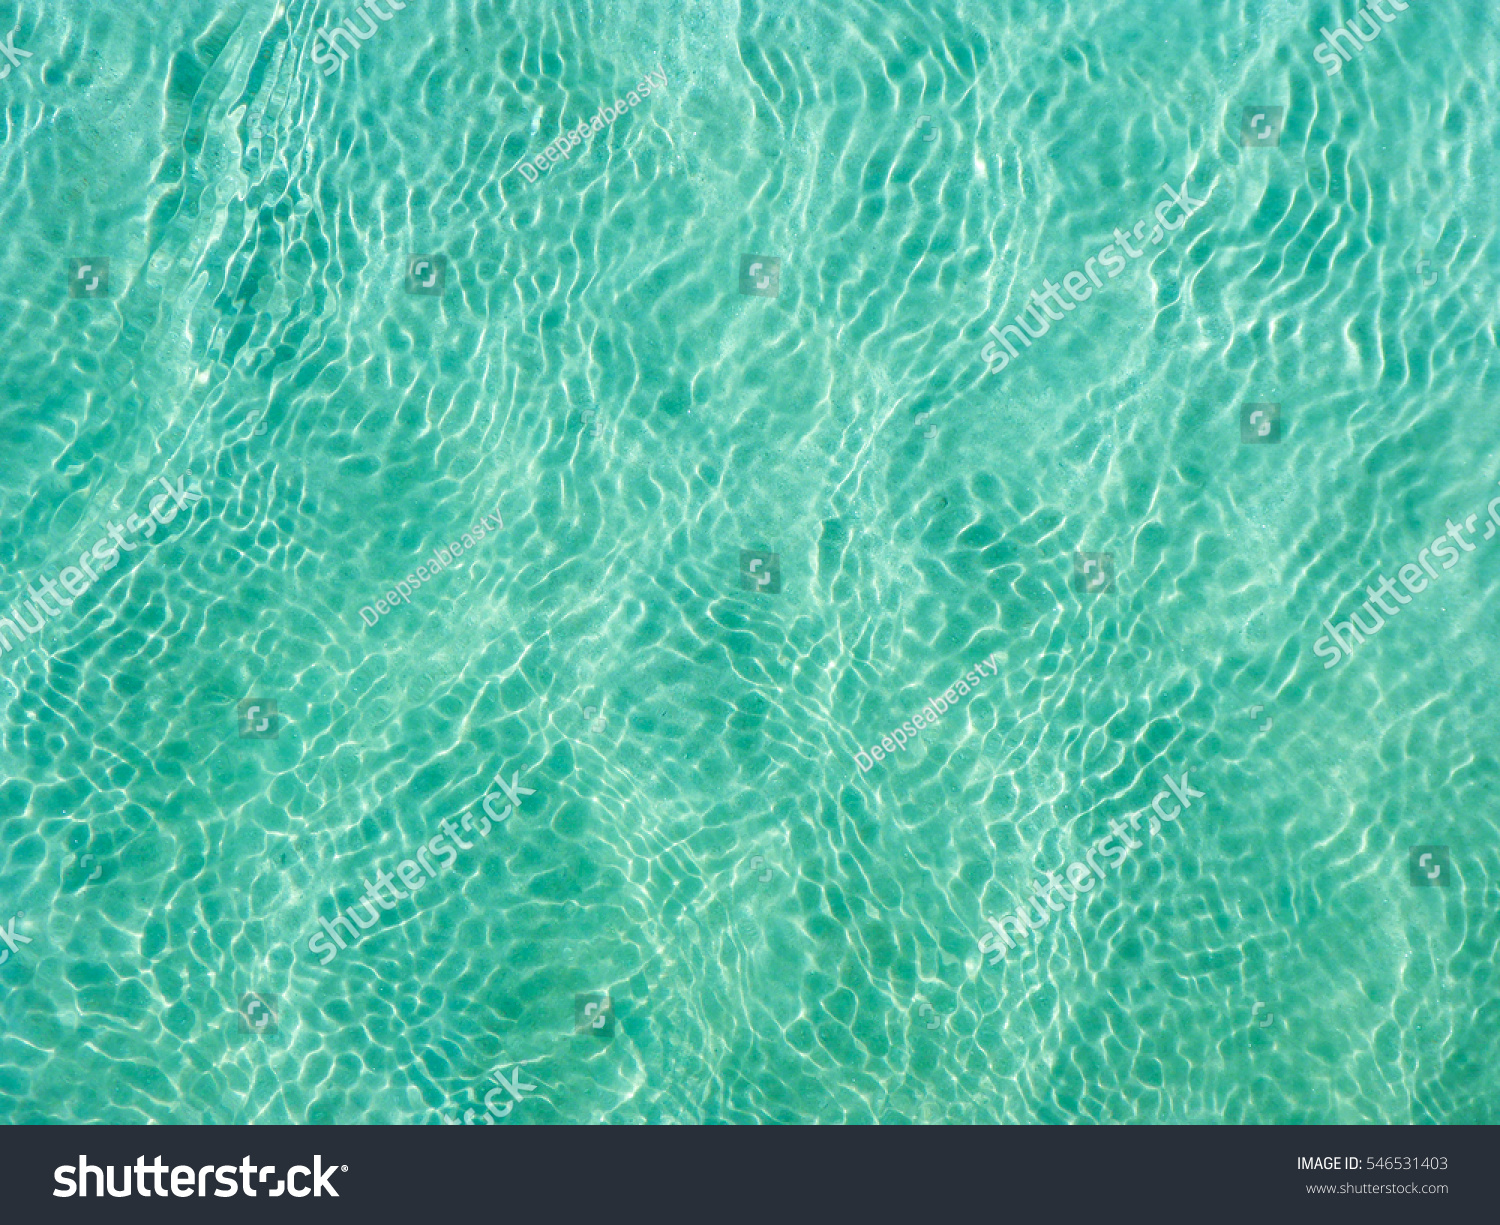 Turquoise Water near to the Sand underneath forming many little waves reflecting the Sun, Thailand #546531403